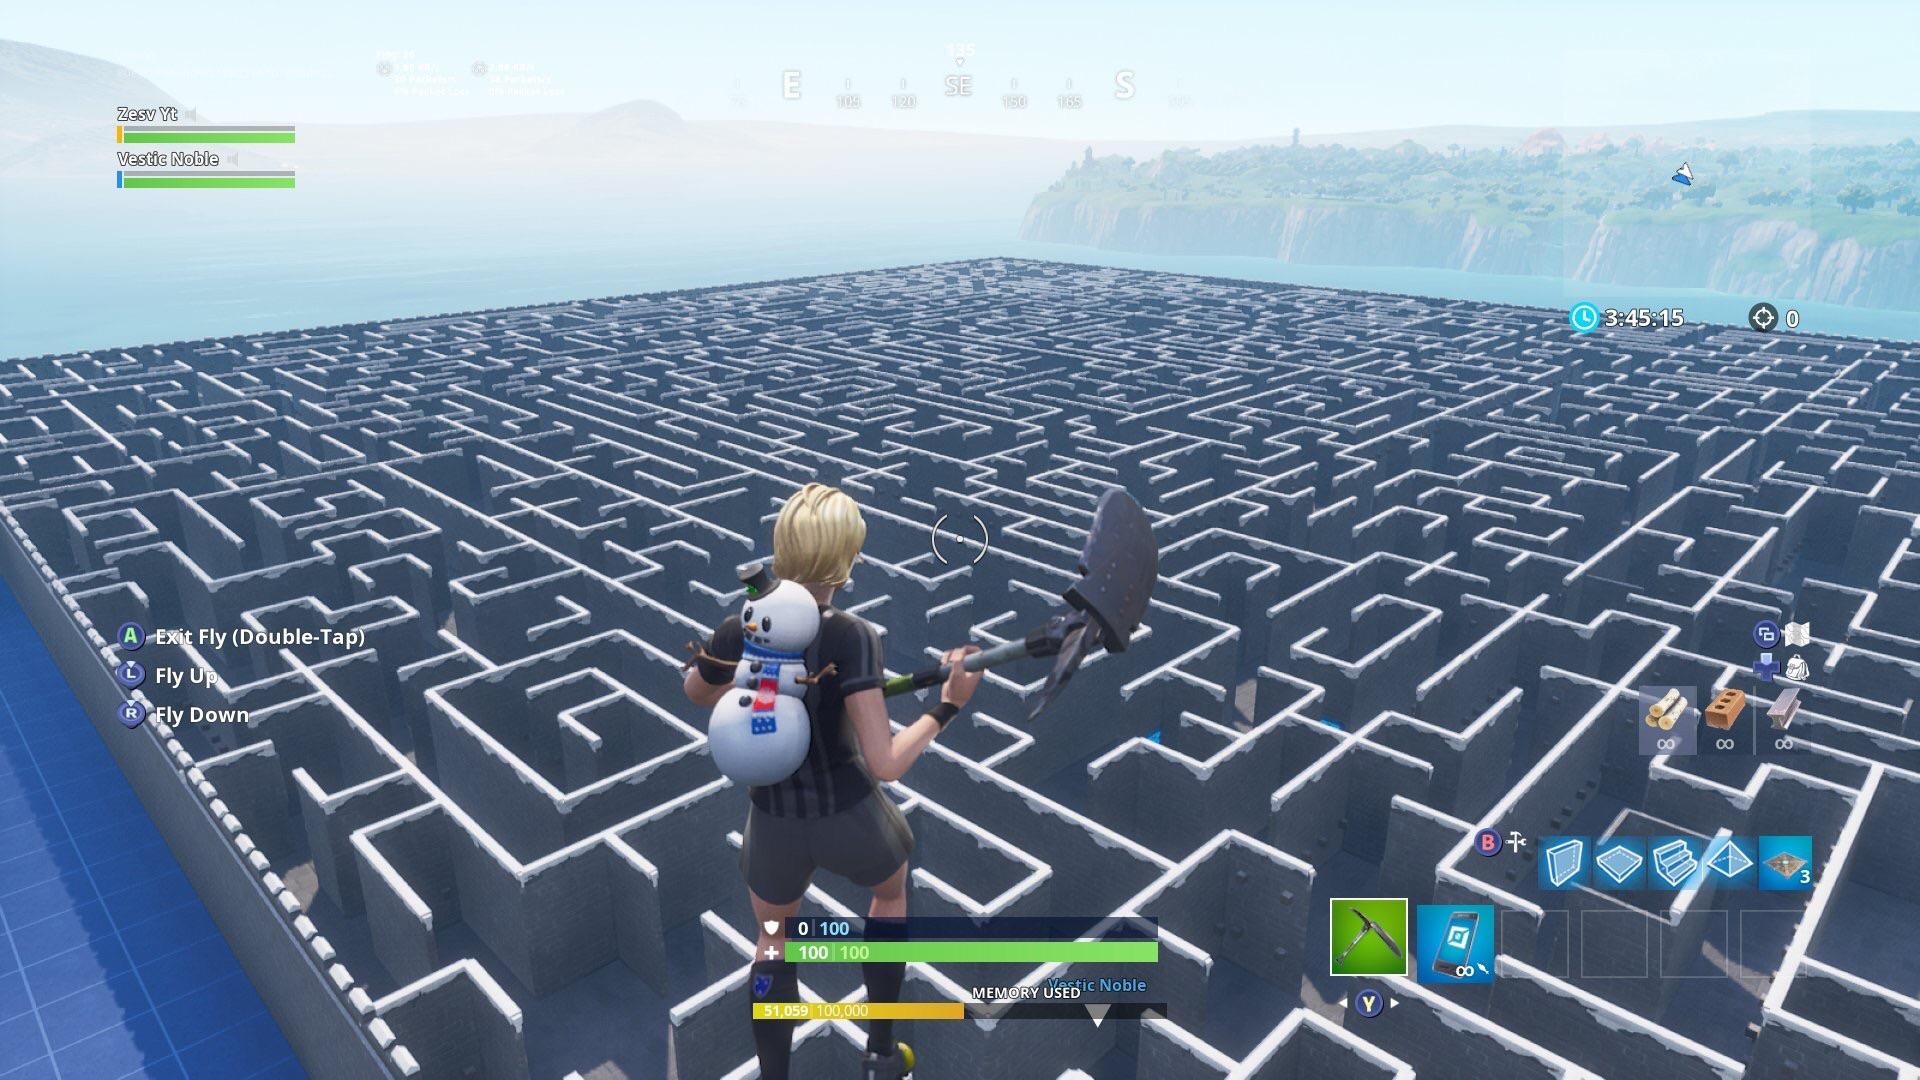 A Fortnite character overlooking a dense maze